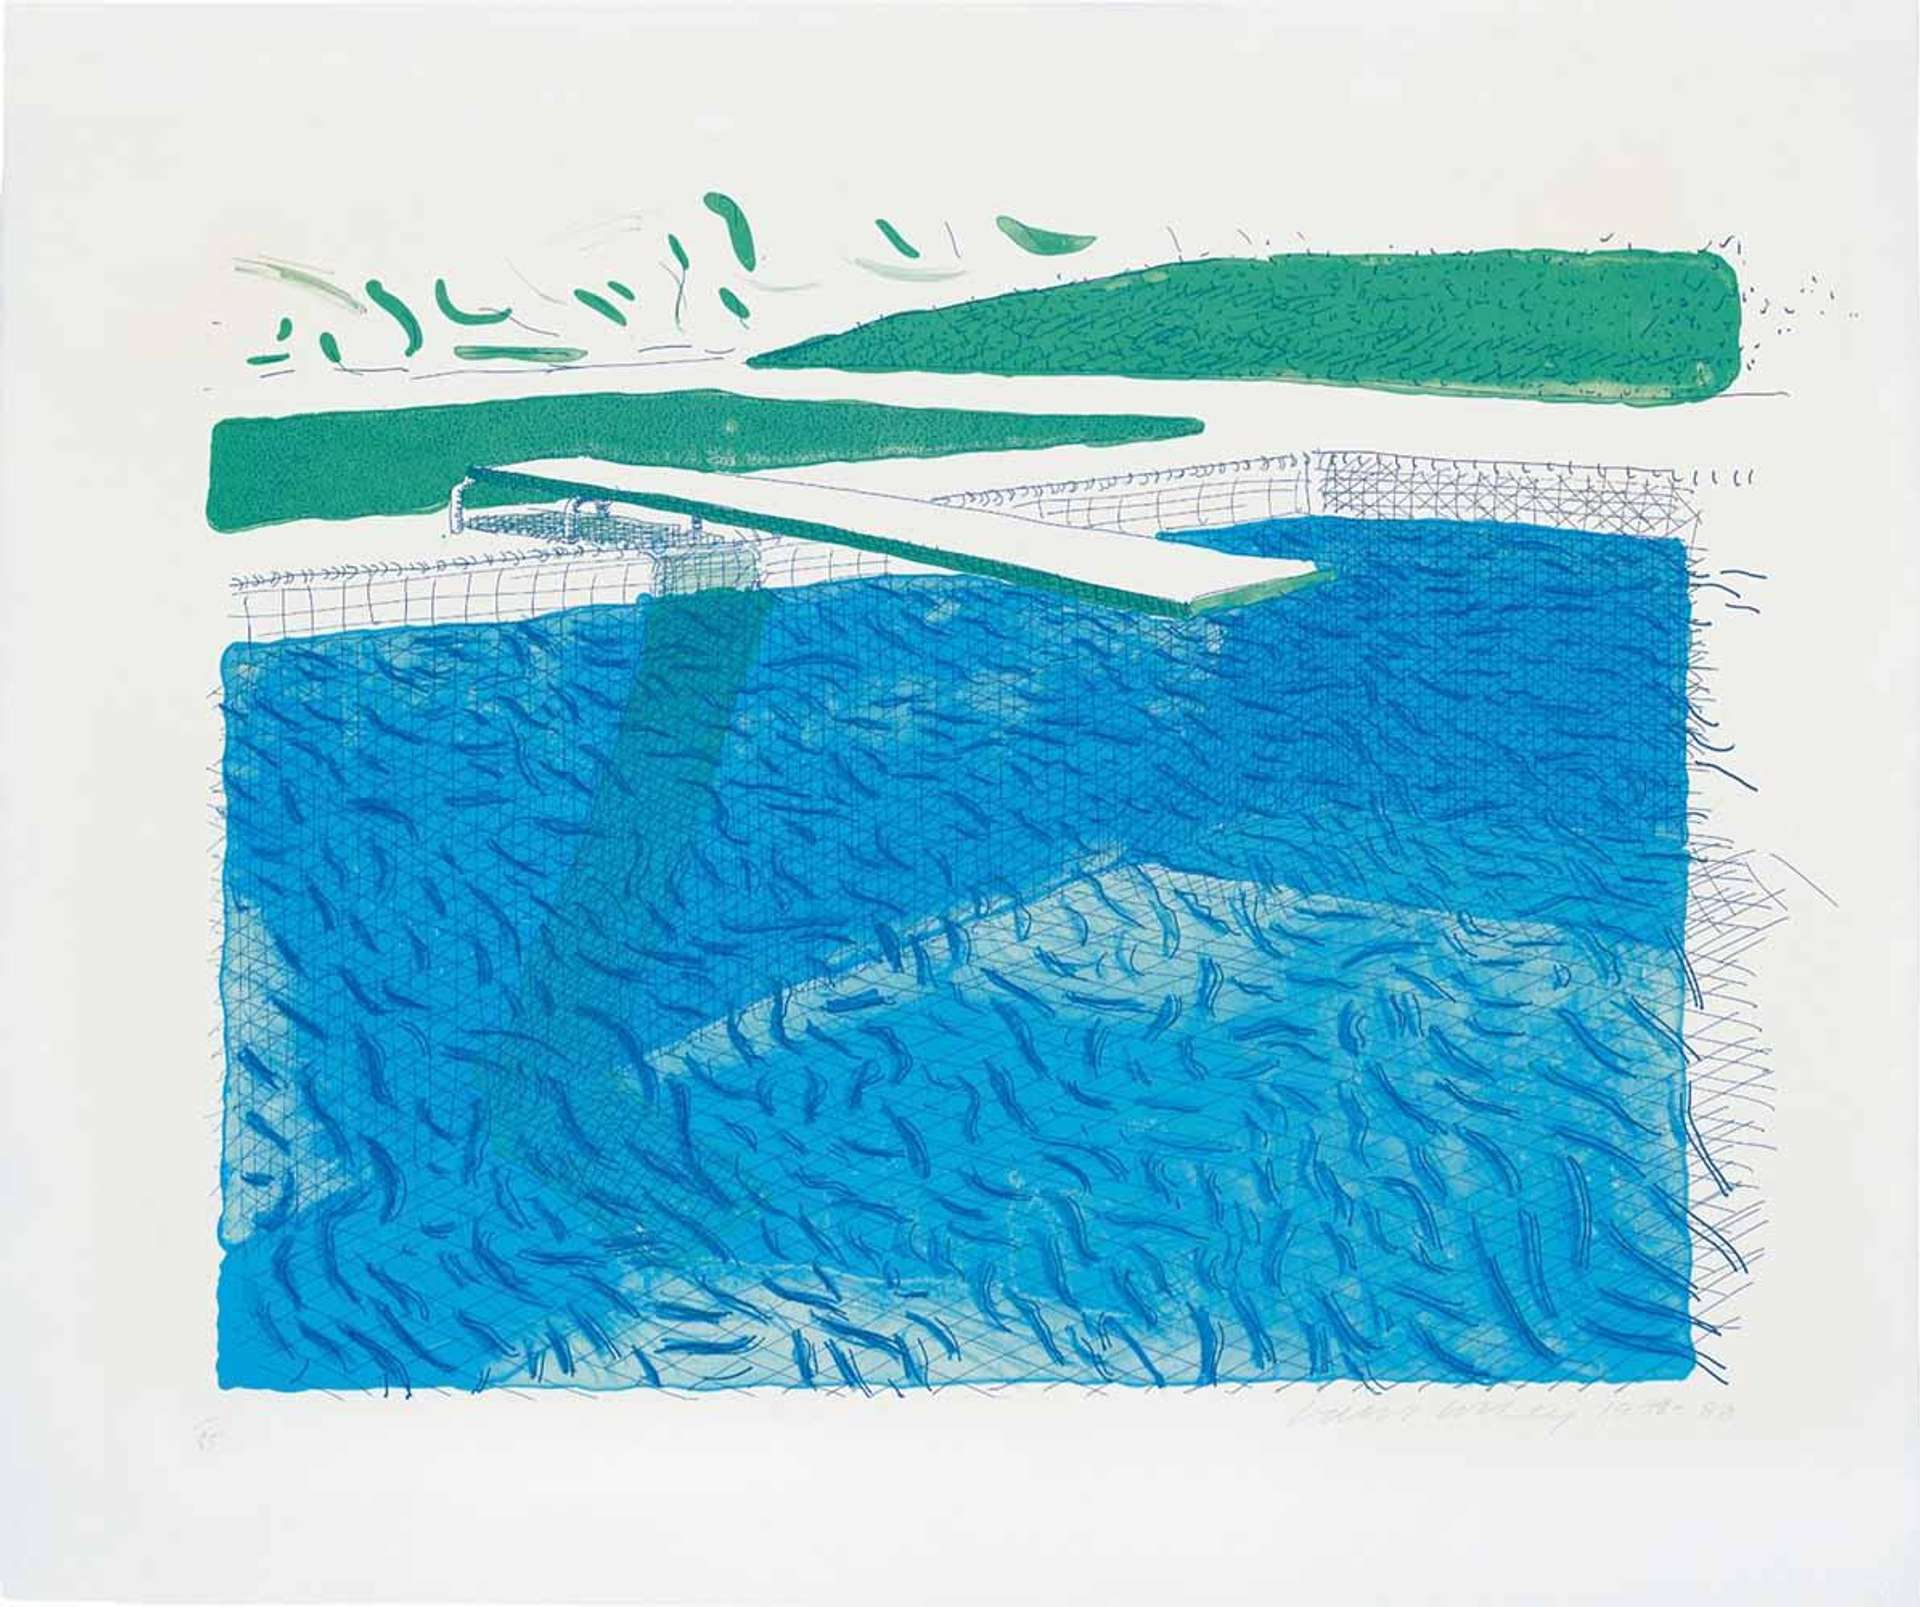 A swimming pool delineated with blue and green mark making. A spring board reaches towards the centre of the composition from the left.